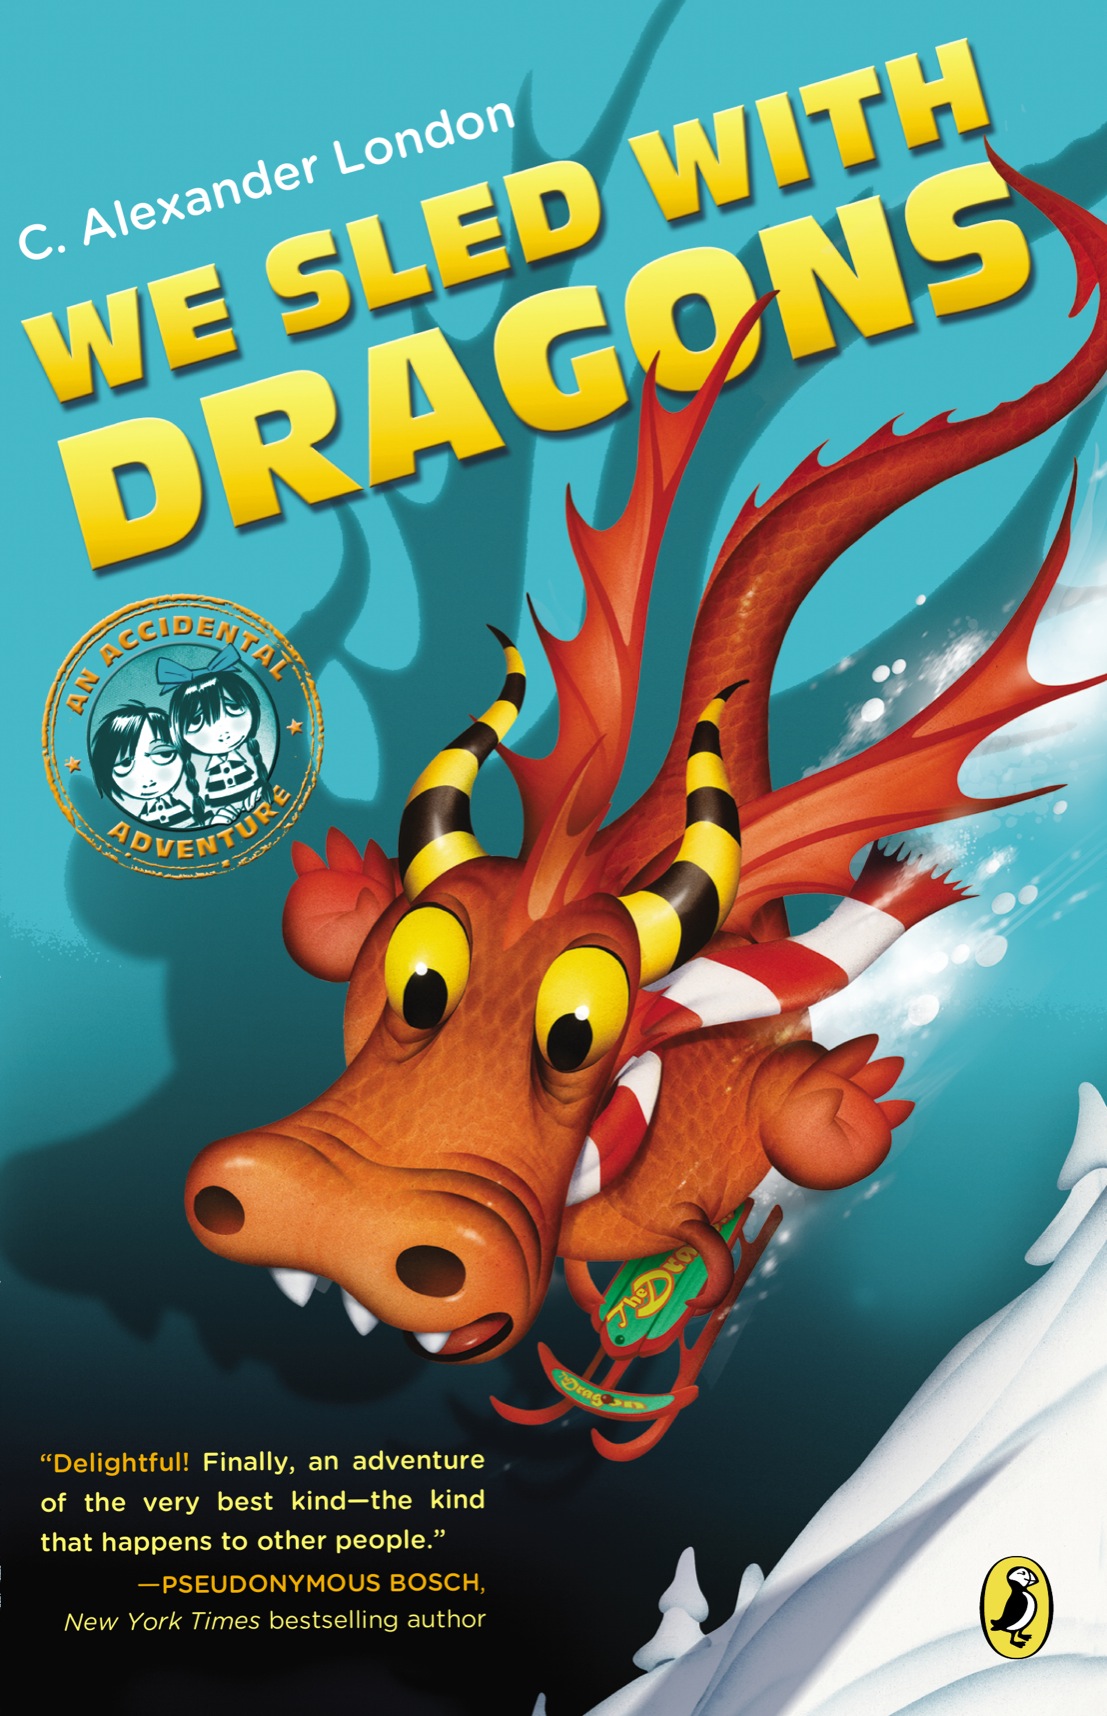 We Sled With Dragons (2013) by C. Alexander London